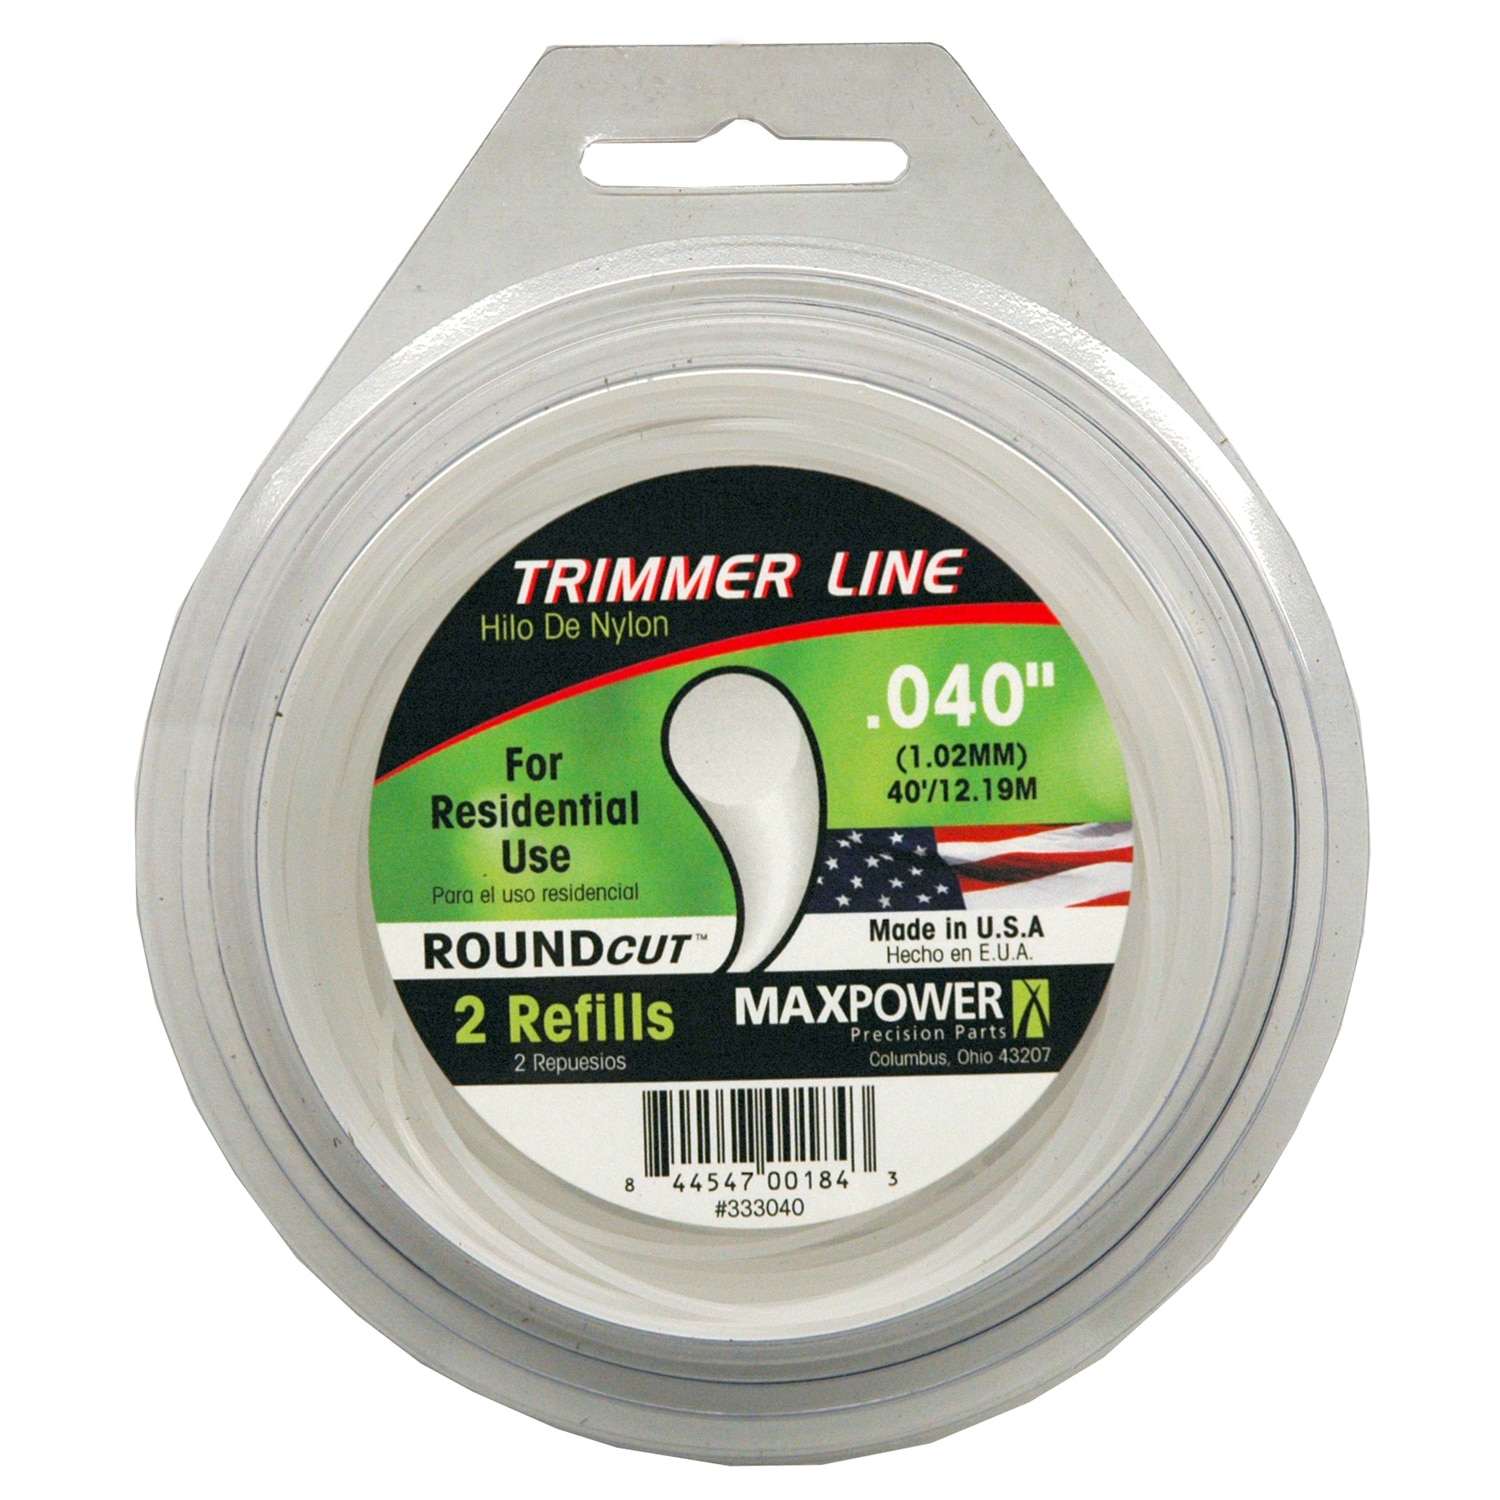 max power trimmer line